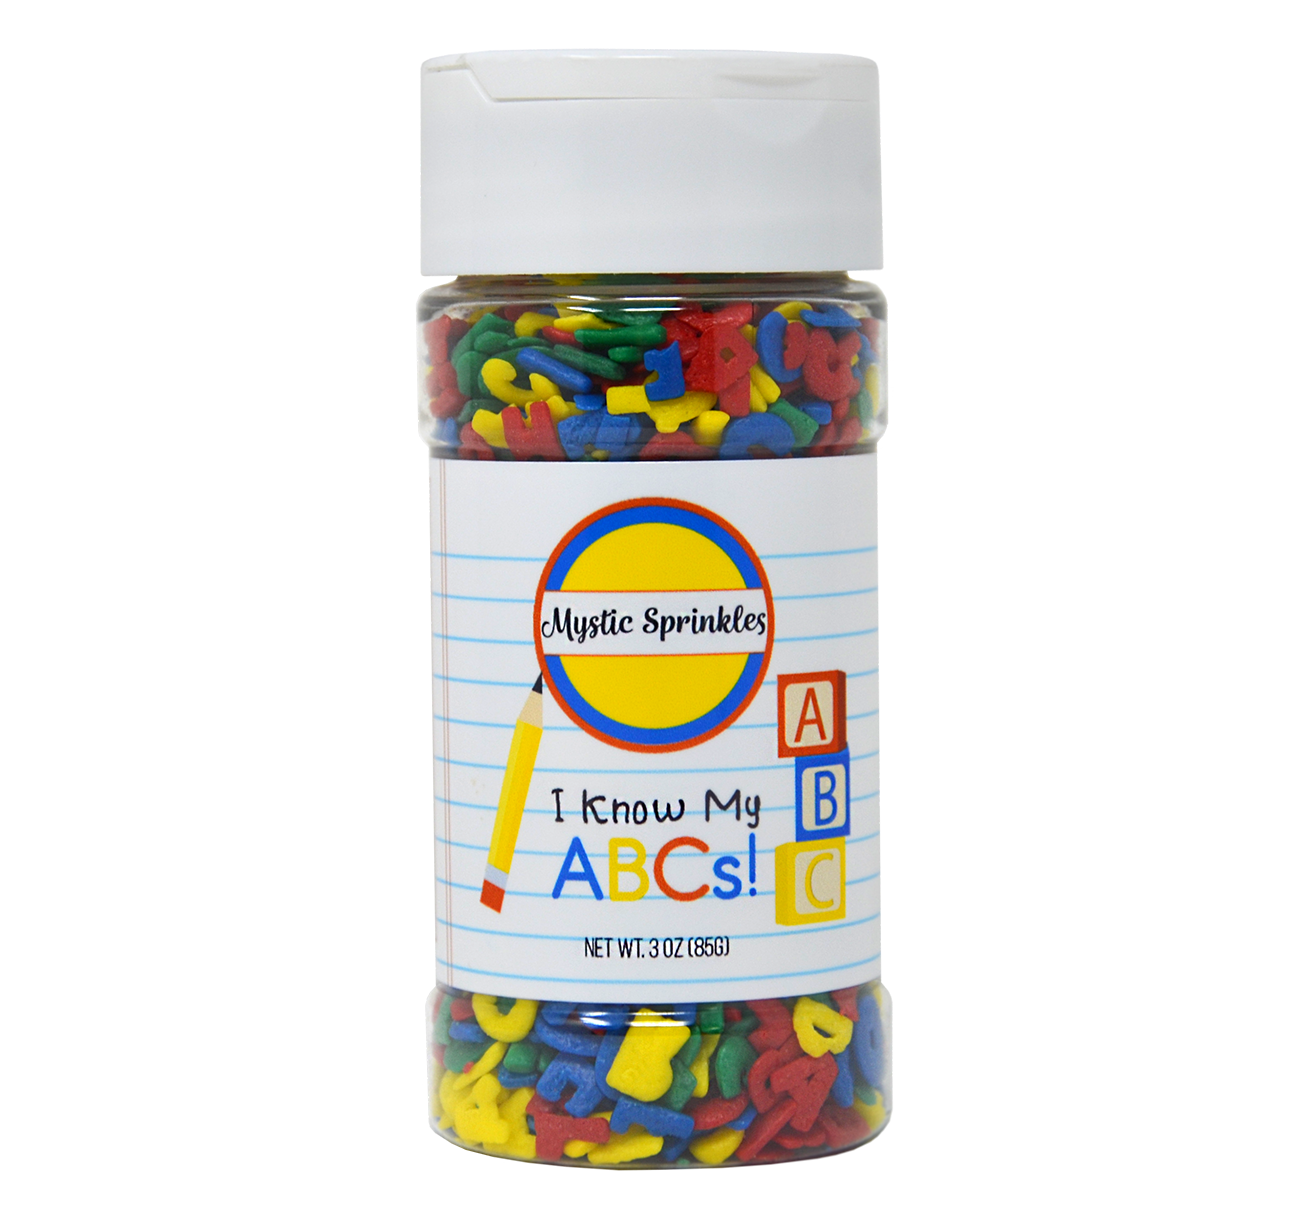 I Know My ABCs! Confetti Mix 3 Ounce Bottle